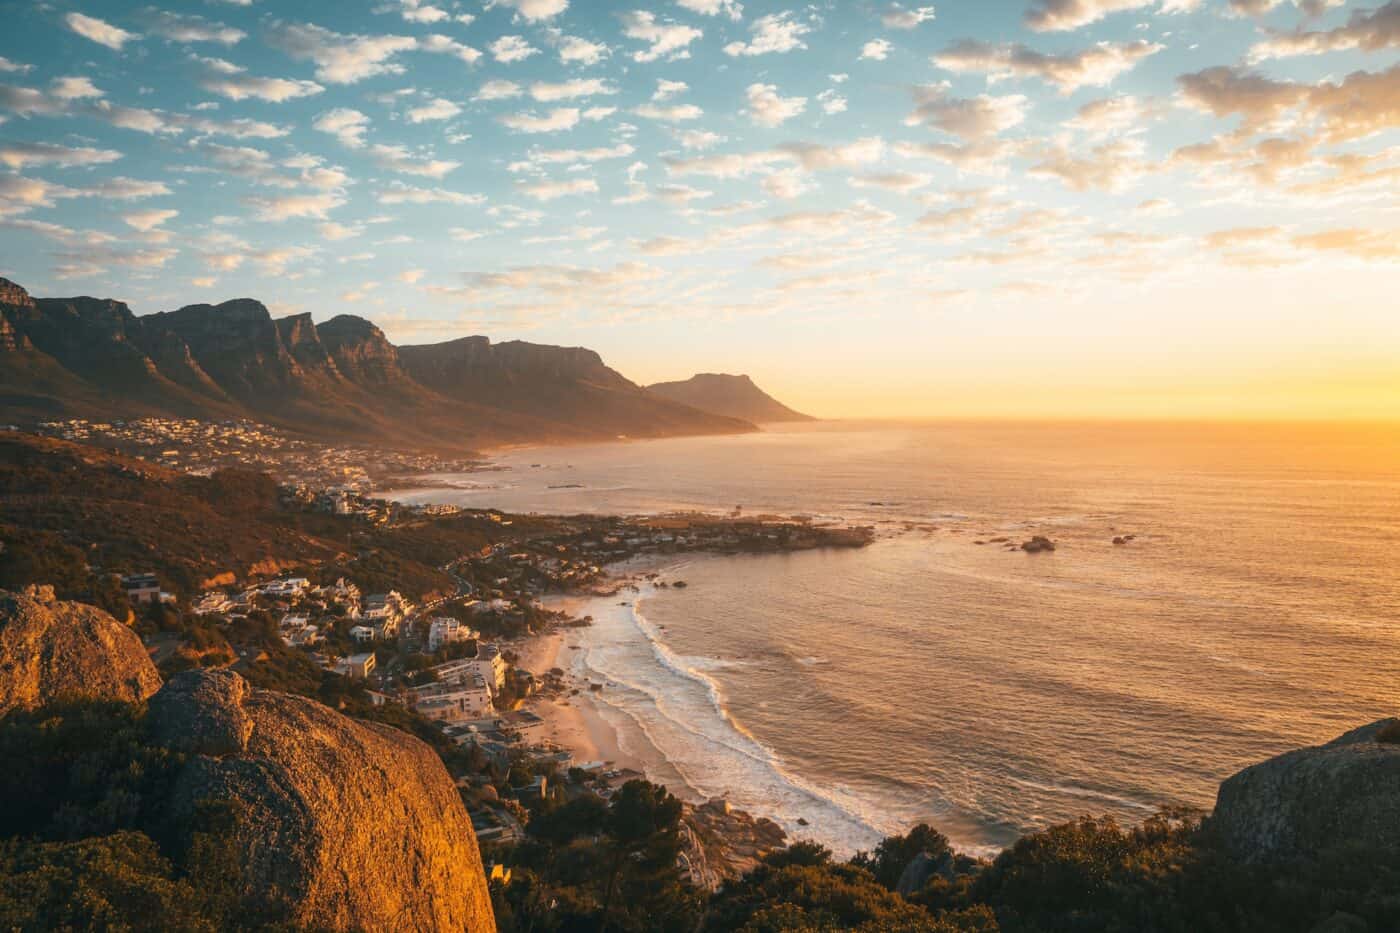 Sunset over table mountain in cape town, south africa.